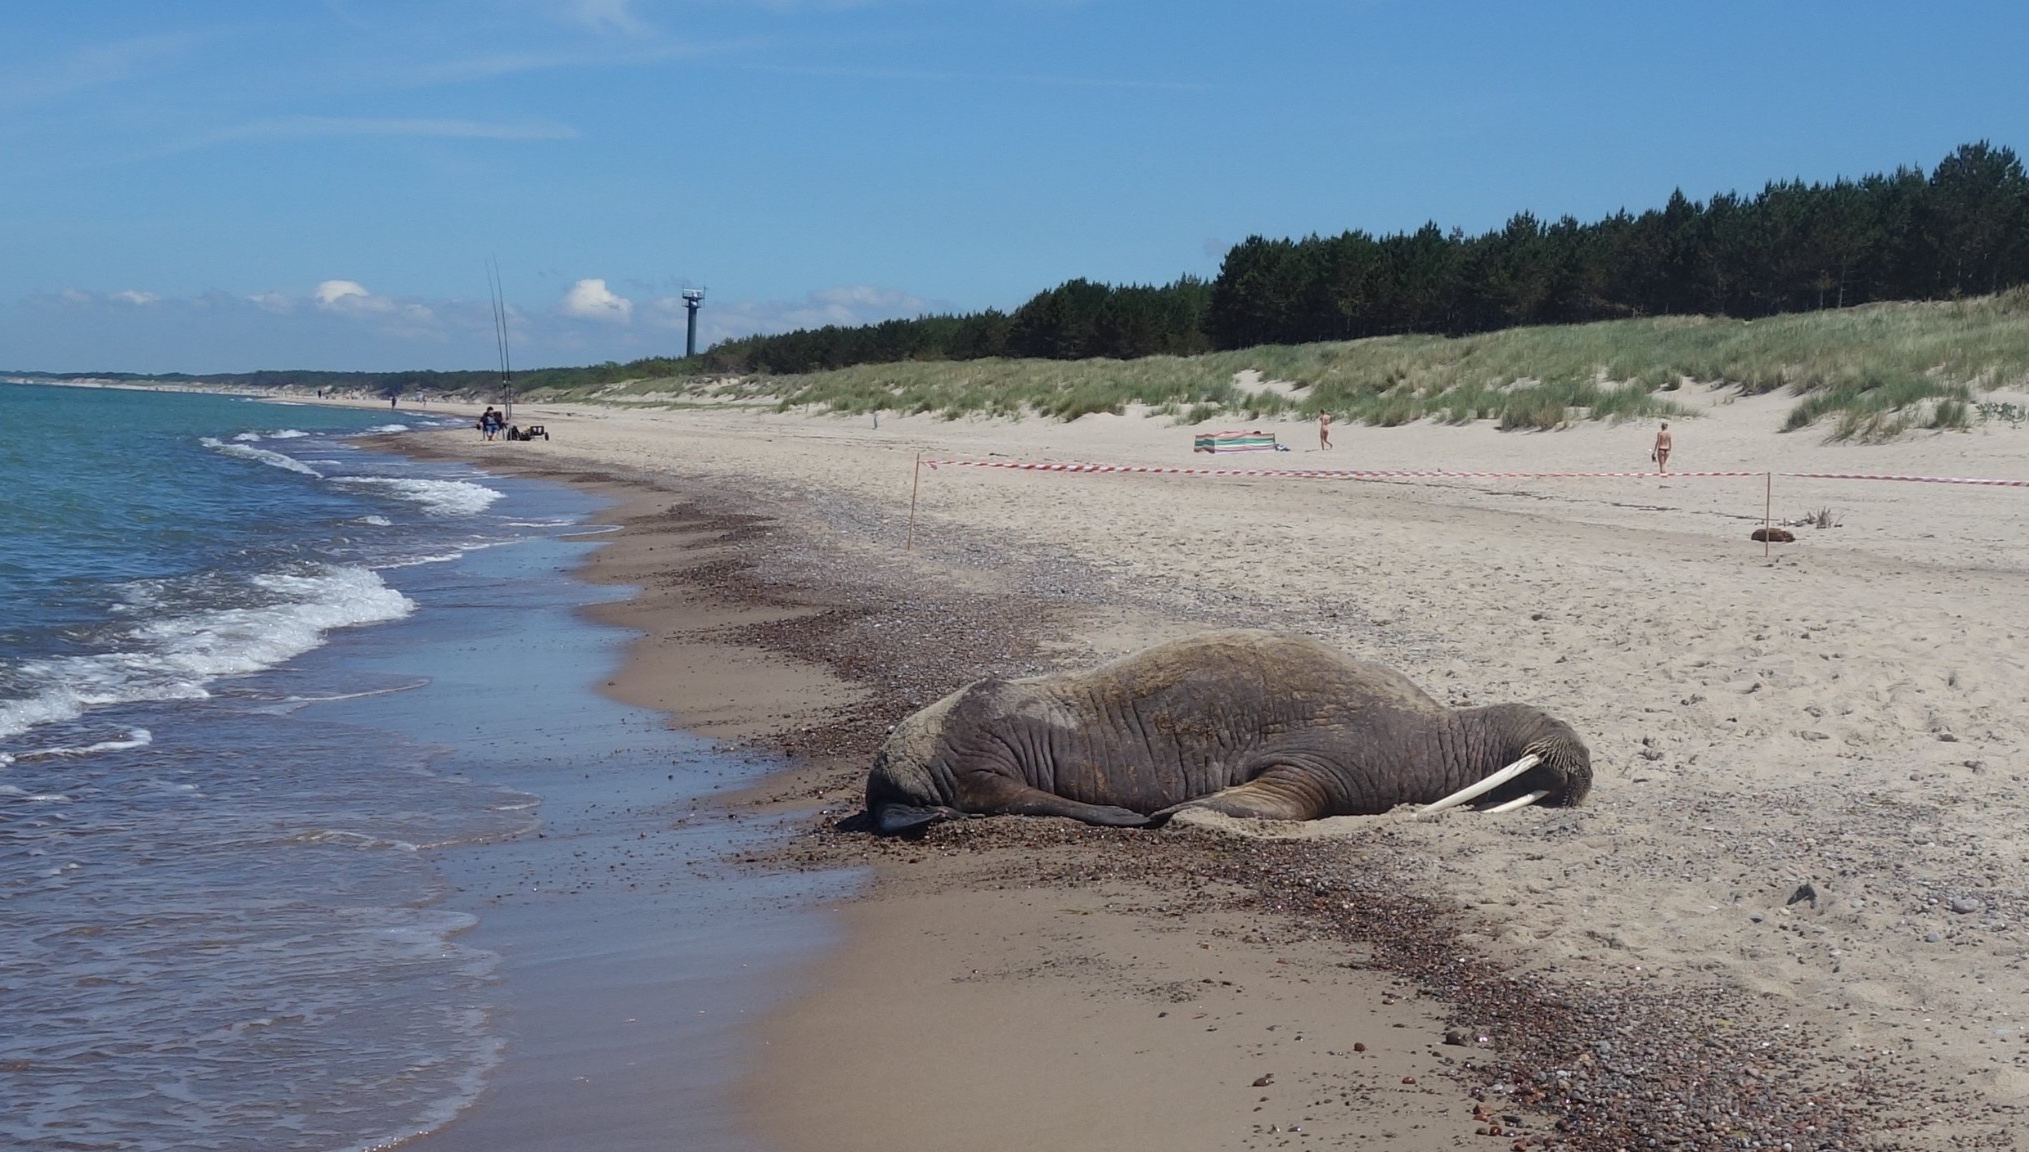 The first such walrus on the Polish beach in Mielno